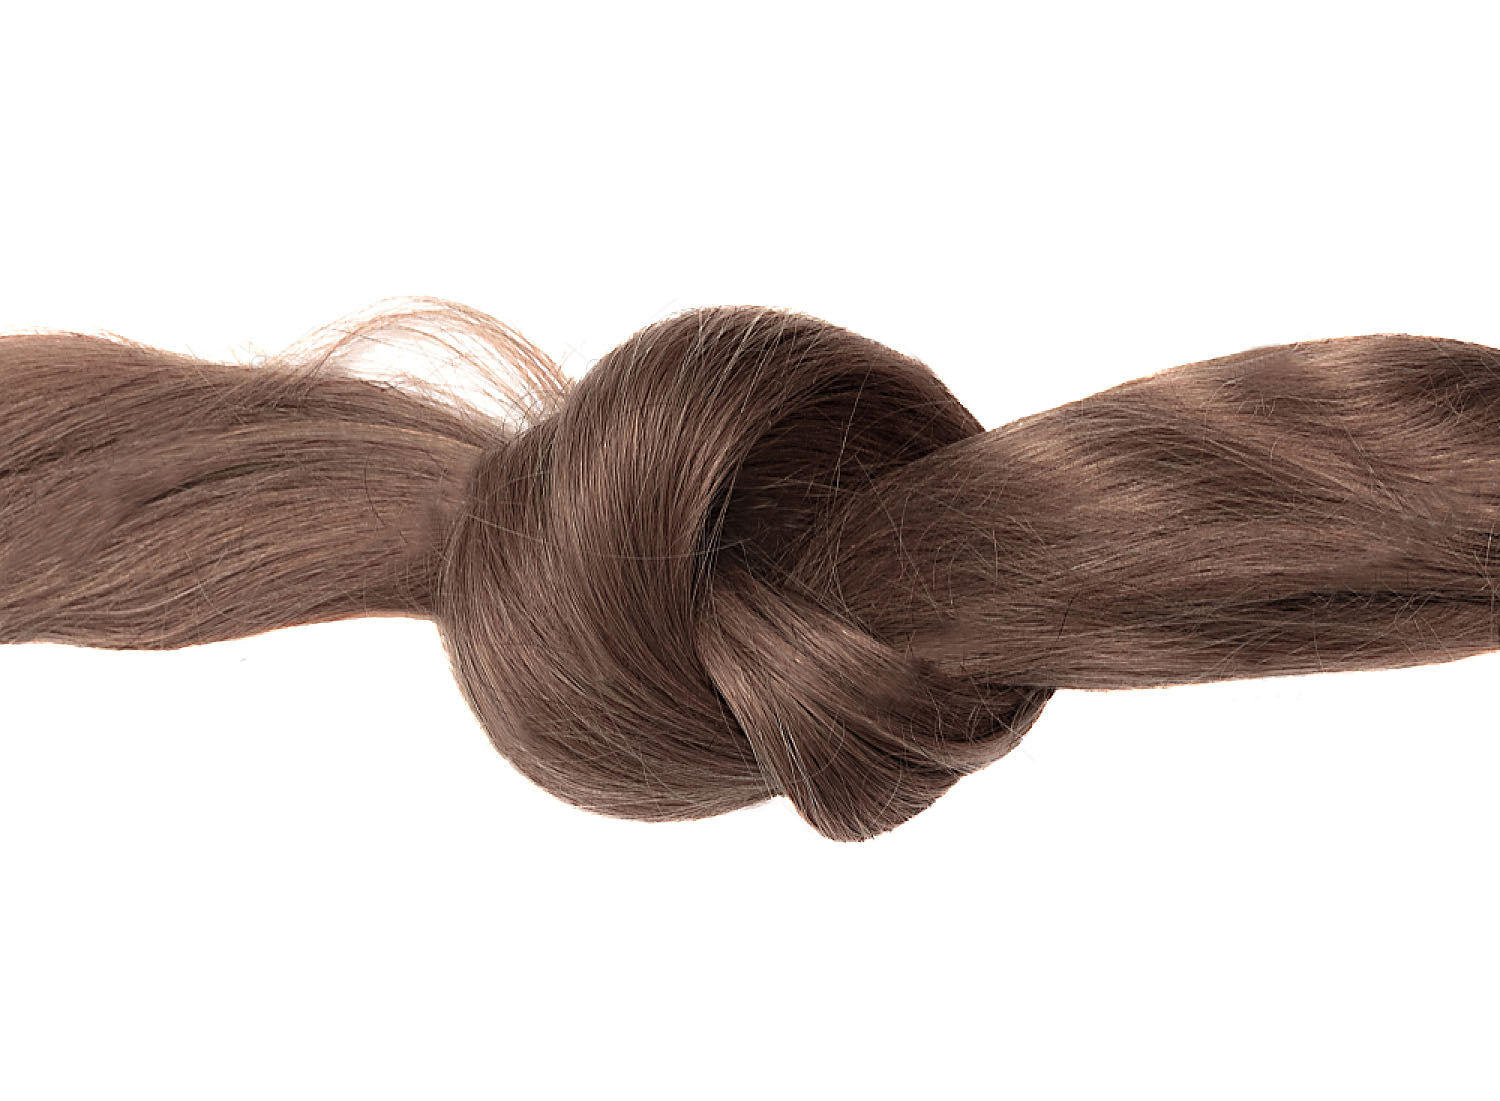 Why do Synthetic Wigs Tangle Frequently?